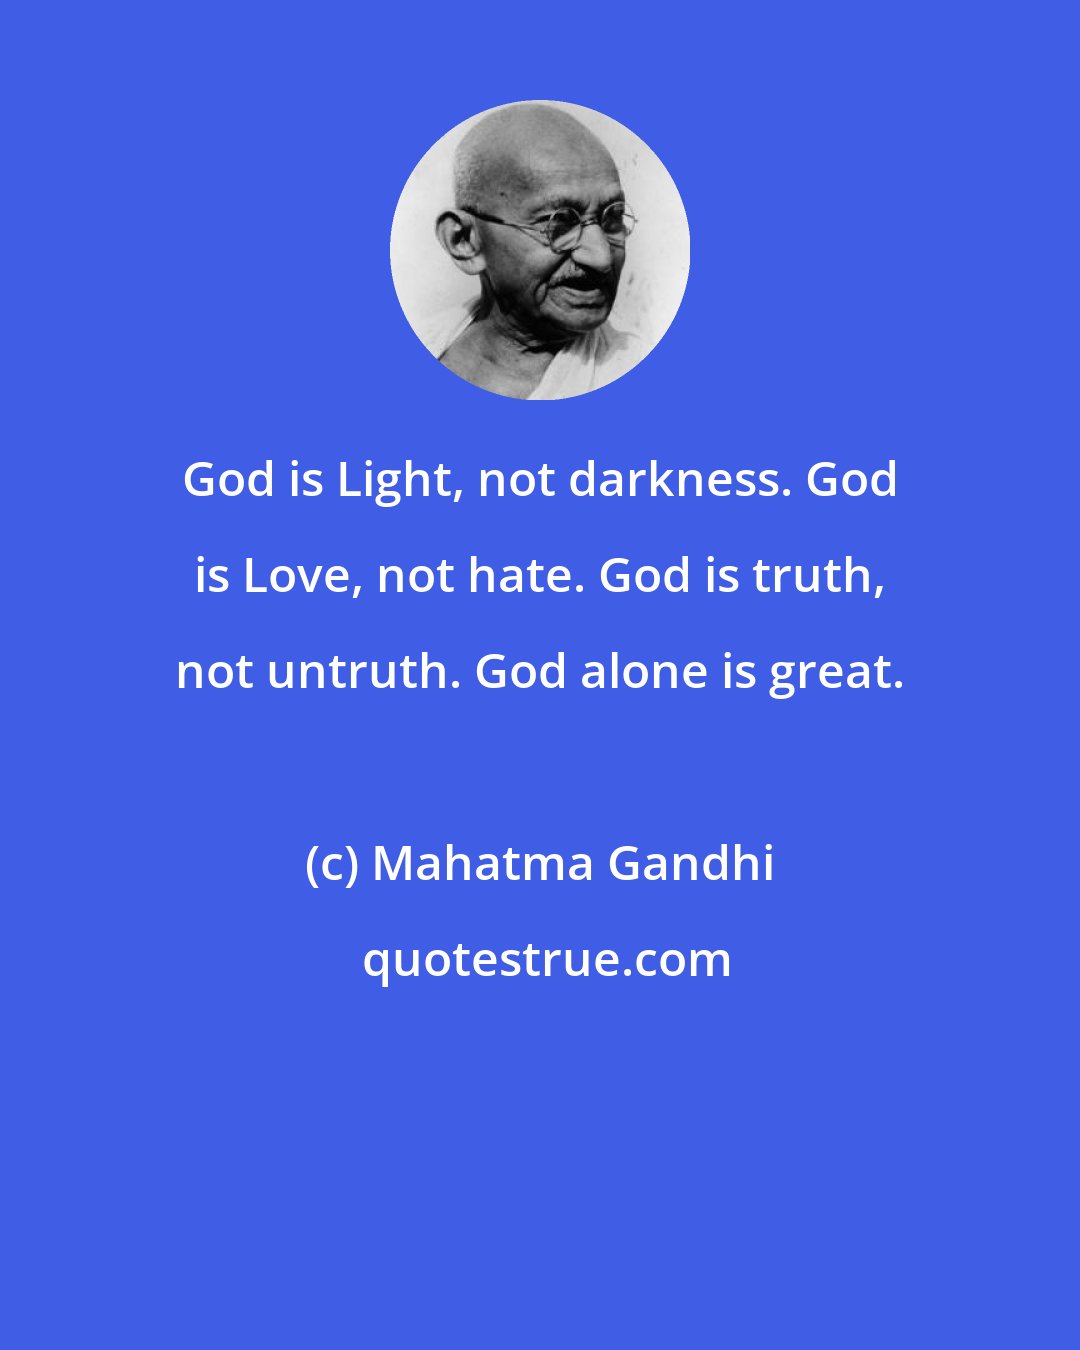 Mahatma Gandhi: God is Light, not darkness. God is Love, not hate. God is truth, not untruth. God alone is great.